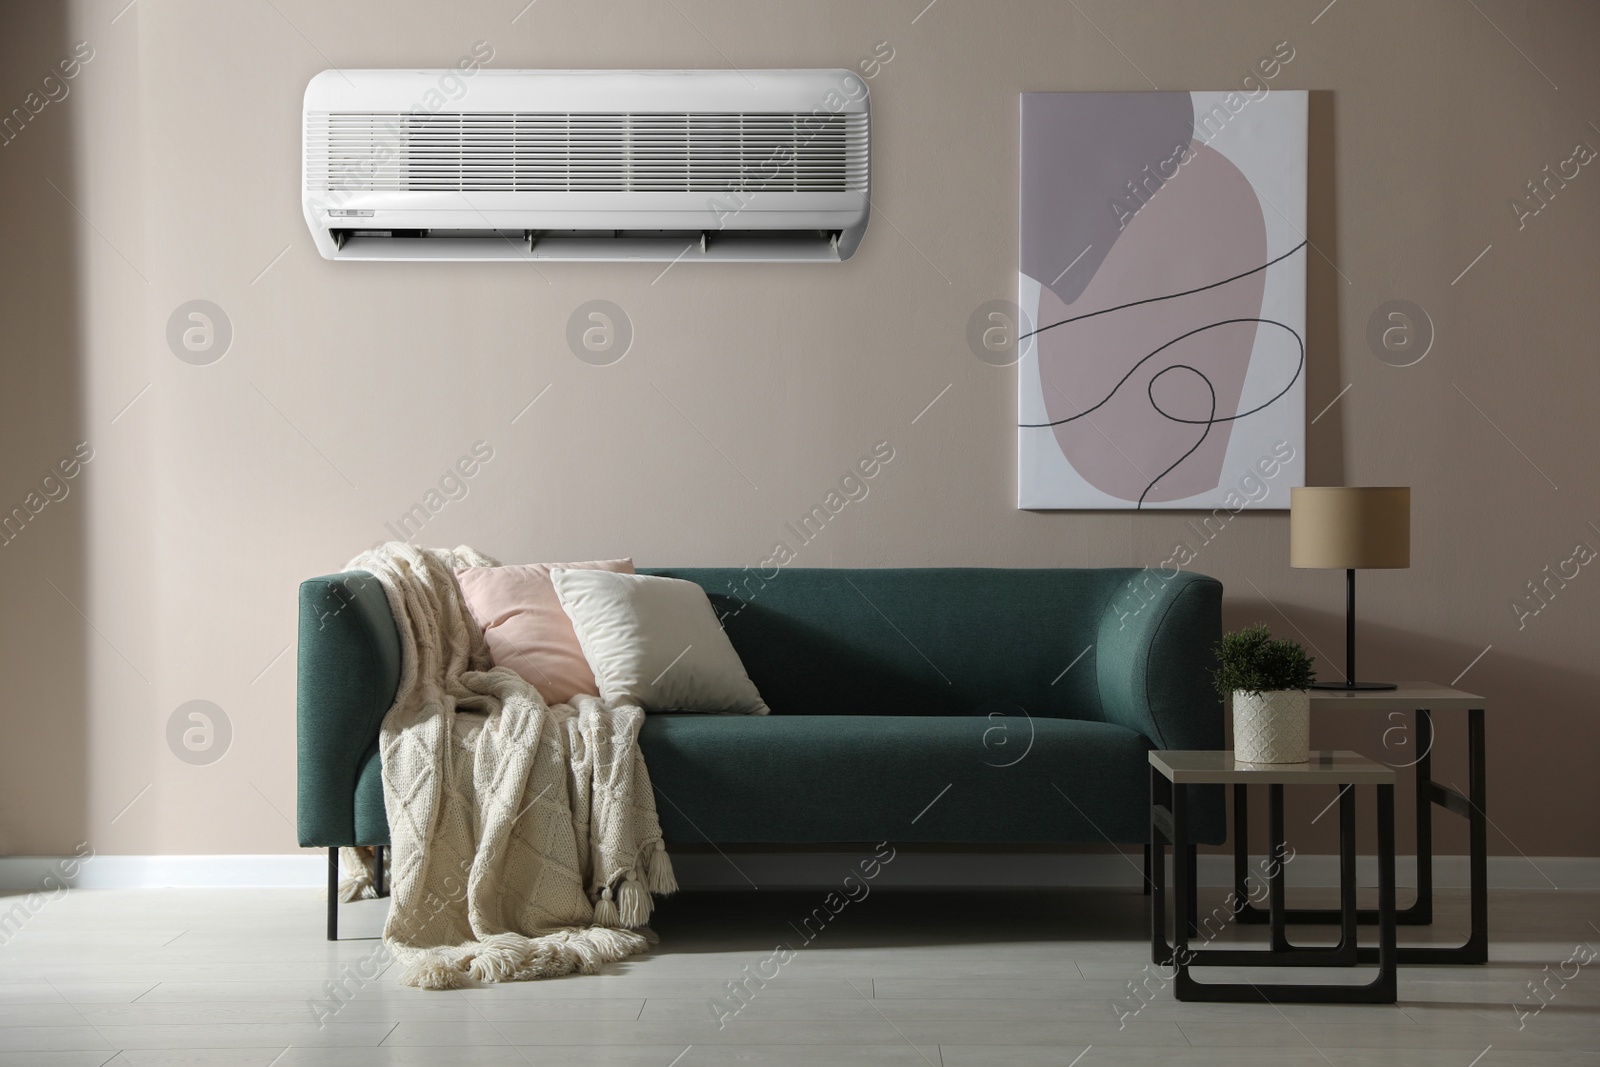 Image of Modern air conditioner on beige wall in room with stylish sofa